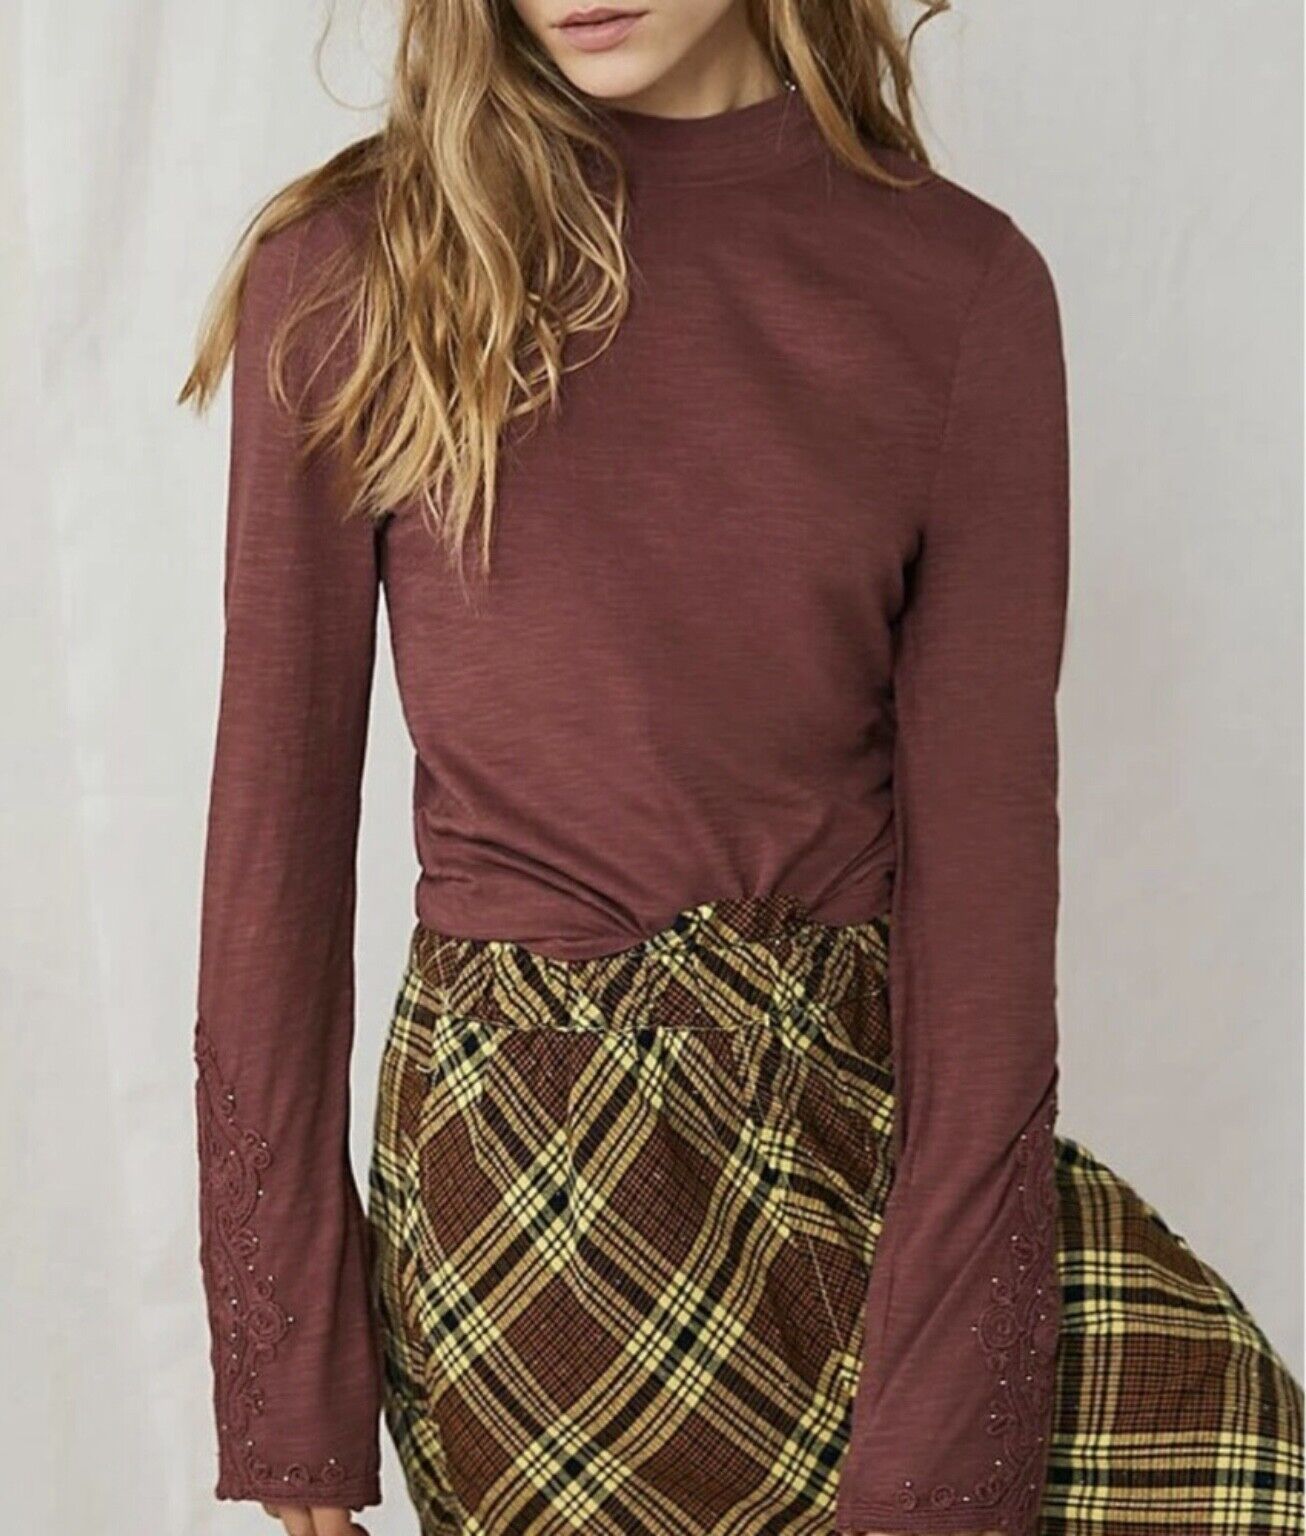 Primary image for NEW FREE PEOPLE We The Free Burgundy Embroidered Long Sleeve Shirt (Size XS)